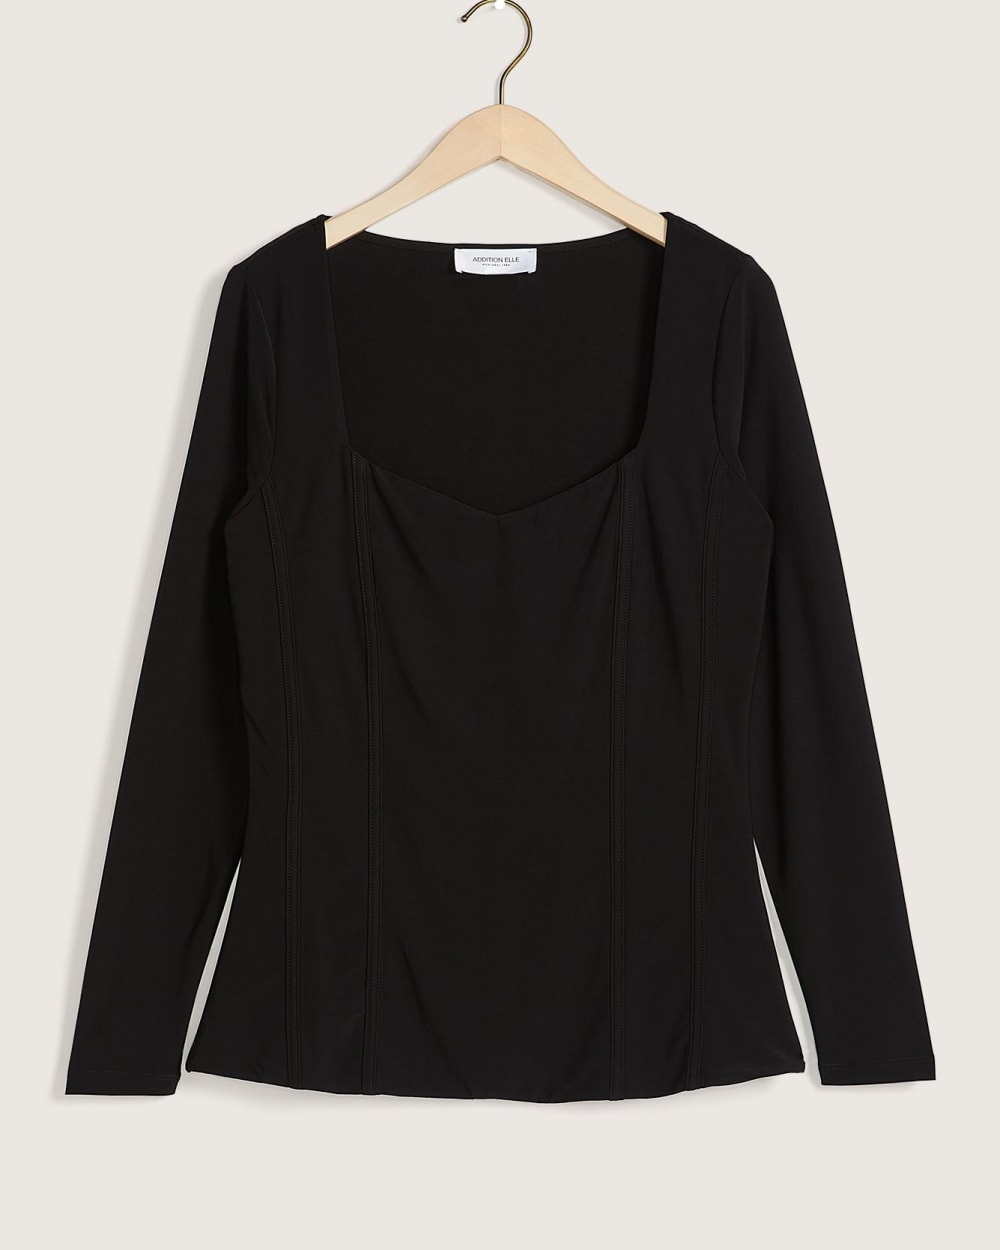 Long-Sleeve Top with Sweetheart Neckline - Addition Elle